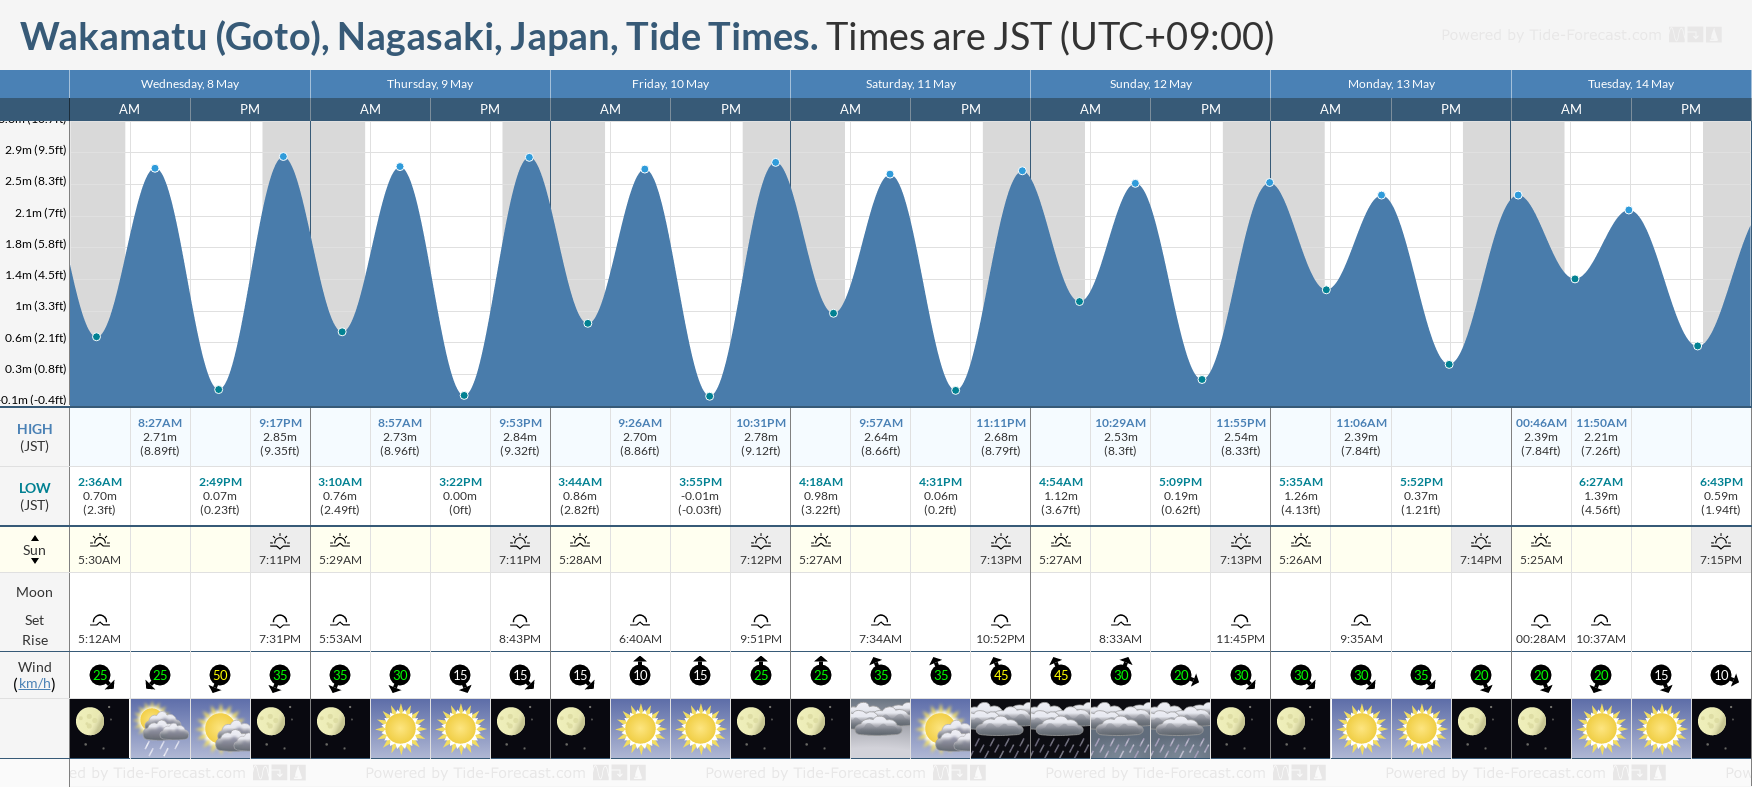 Wakamatu (Goto), Nagasaki, Japan Tide Chart including high and low tide tide times for the next 7 days